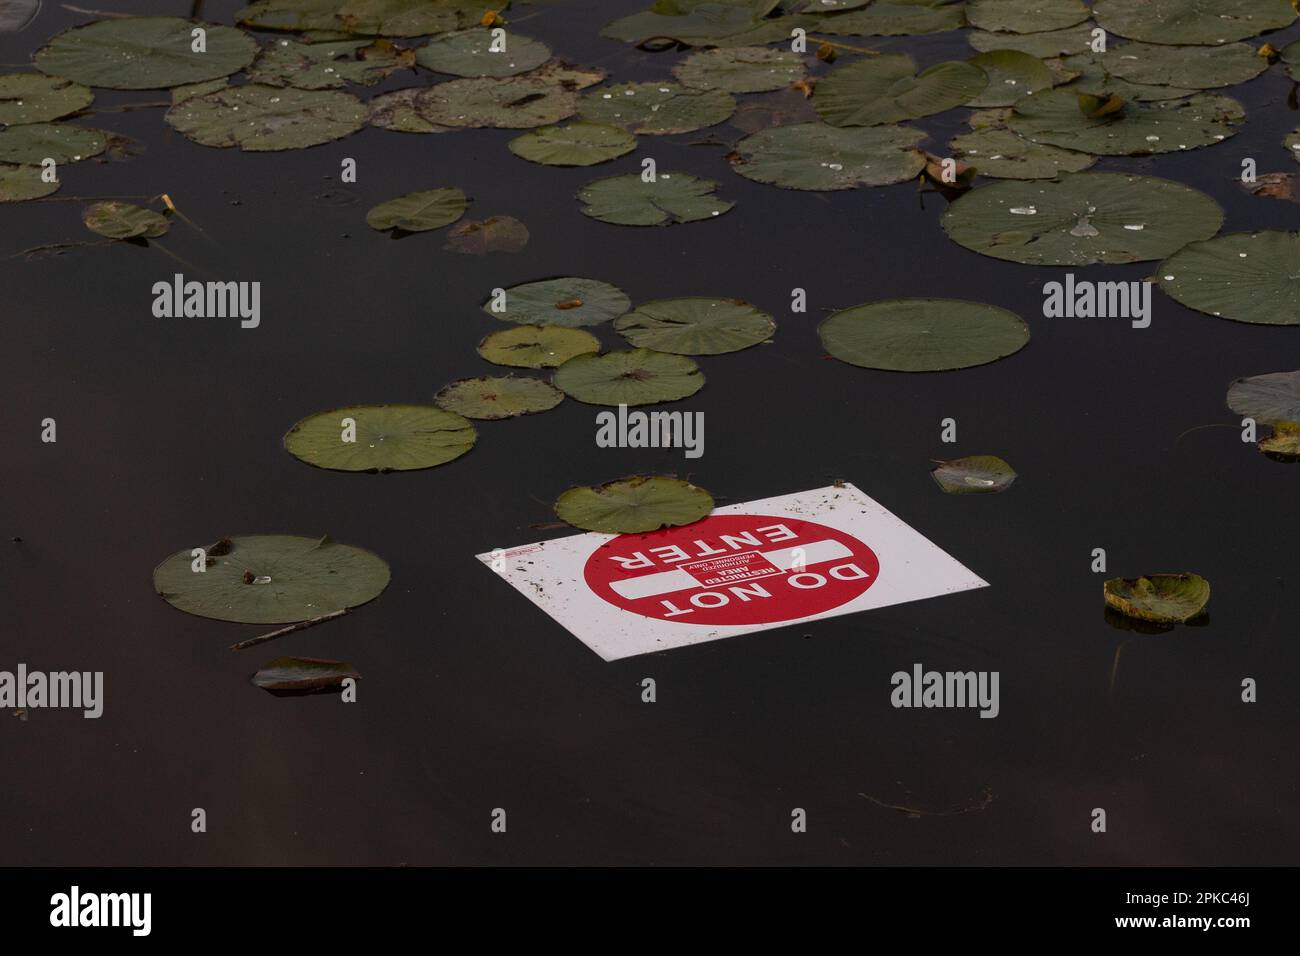 A sign 'Do not enter' is floating on the lake water among the weed as the consequent of the hurricane in Florida, unusual sign Stock Photo